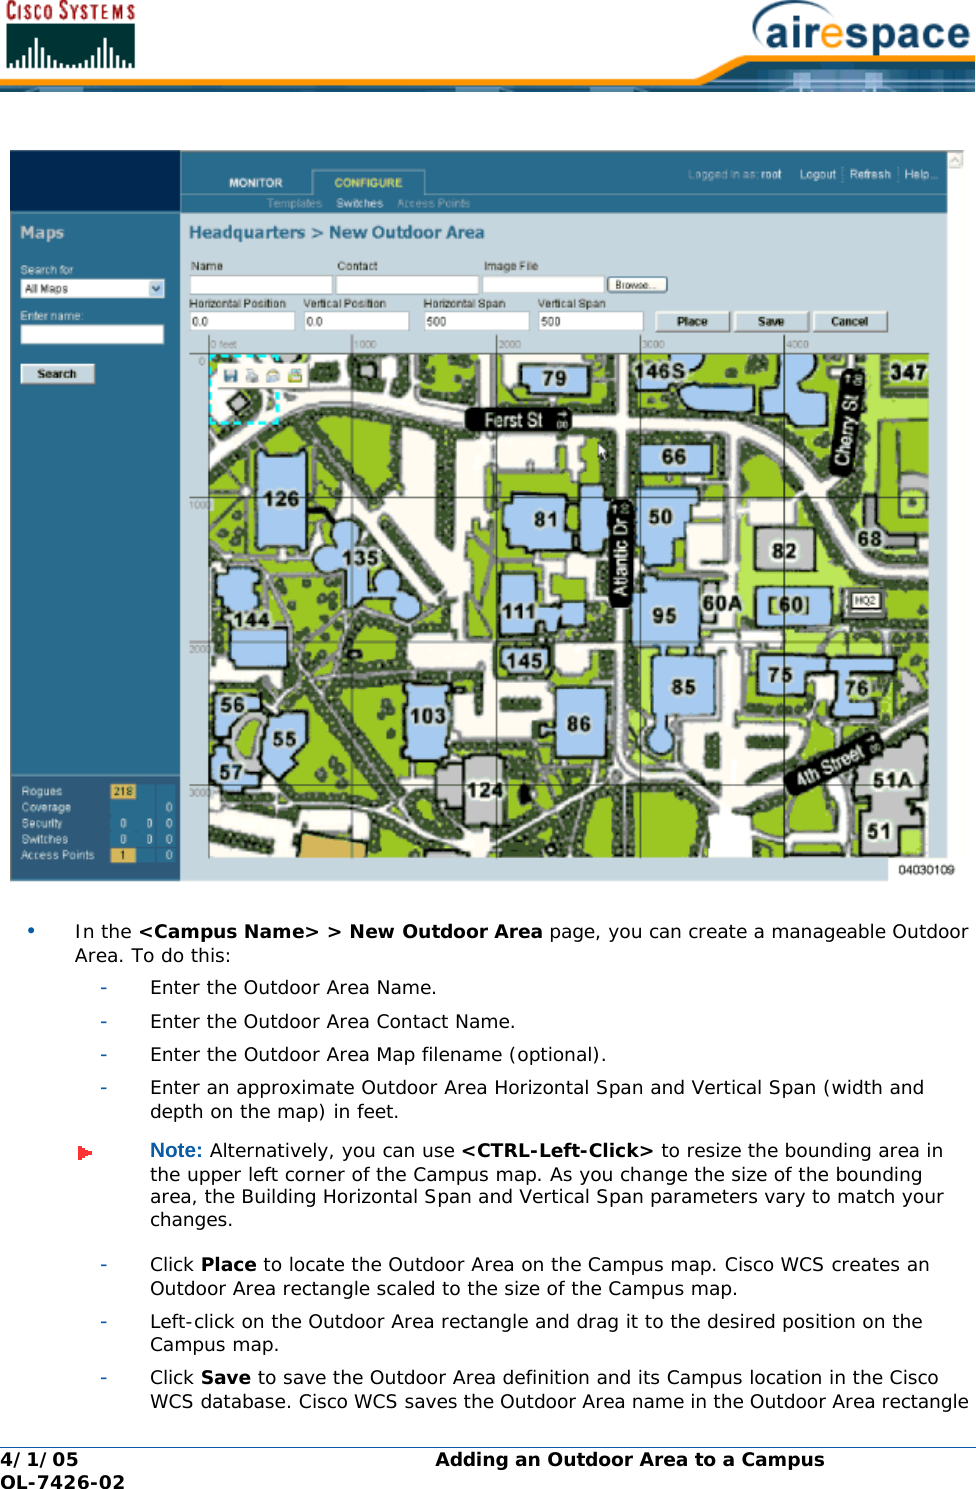 4/1/05 Adding an Outdoor Area to a Campus  OL-7426-02•In the &lt;Campus Name&gt; &gt; New Outdoor Area page, you can create a manageable Outdoor Area. To do this:-Enter the Outdoor Area Name.-Enter the Outdoor Area Contact Name.-Enter the Outdoor Area Map filename (optional).-Enter an approximate Outdoor Area Horizontal Span and Vertical Span (width and depth on the map) in feet.-Click Place to locate the Outdoor Area on the Campus map. Cisco WCS creates an Outdoor Area rectangle scaled to the size of the Campus map.-Left-click on the Outdoor Area rectangle and drag it to the desired position on the Campus map.-Click Save to save the Outdoor Area definition and its Campus location in the Cisco WCS database. Cisco WCS saves the Outdoor Area name in the Outdoor Area rectangle Note: Alternatively, you can use &lt;CTRL-Left-Click&gt; to resize the bounding area in the upper left corner of the Campus map. As you change the size of the bounding area, the Building Horizontal Span and Vertical Span parameters vary to match your changes.